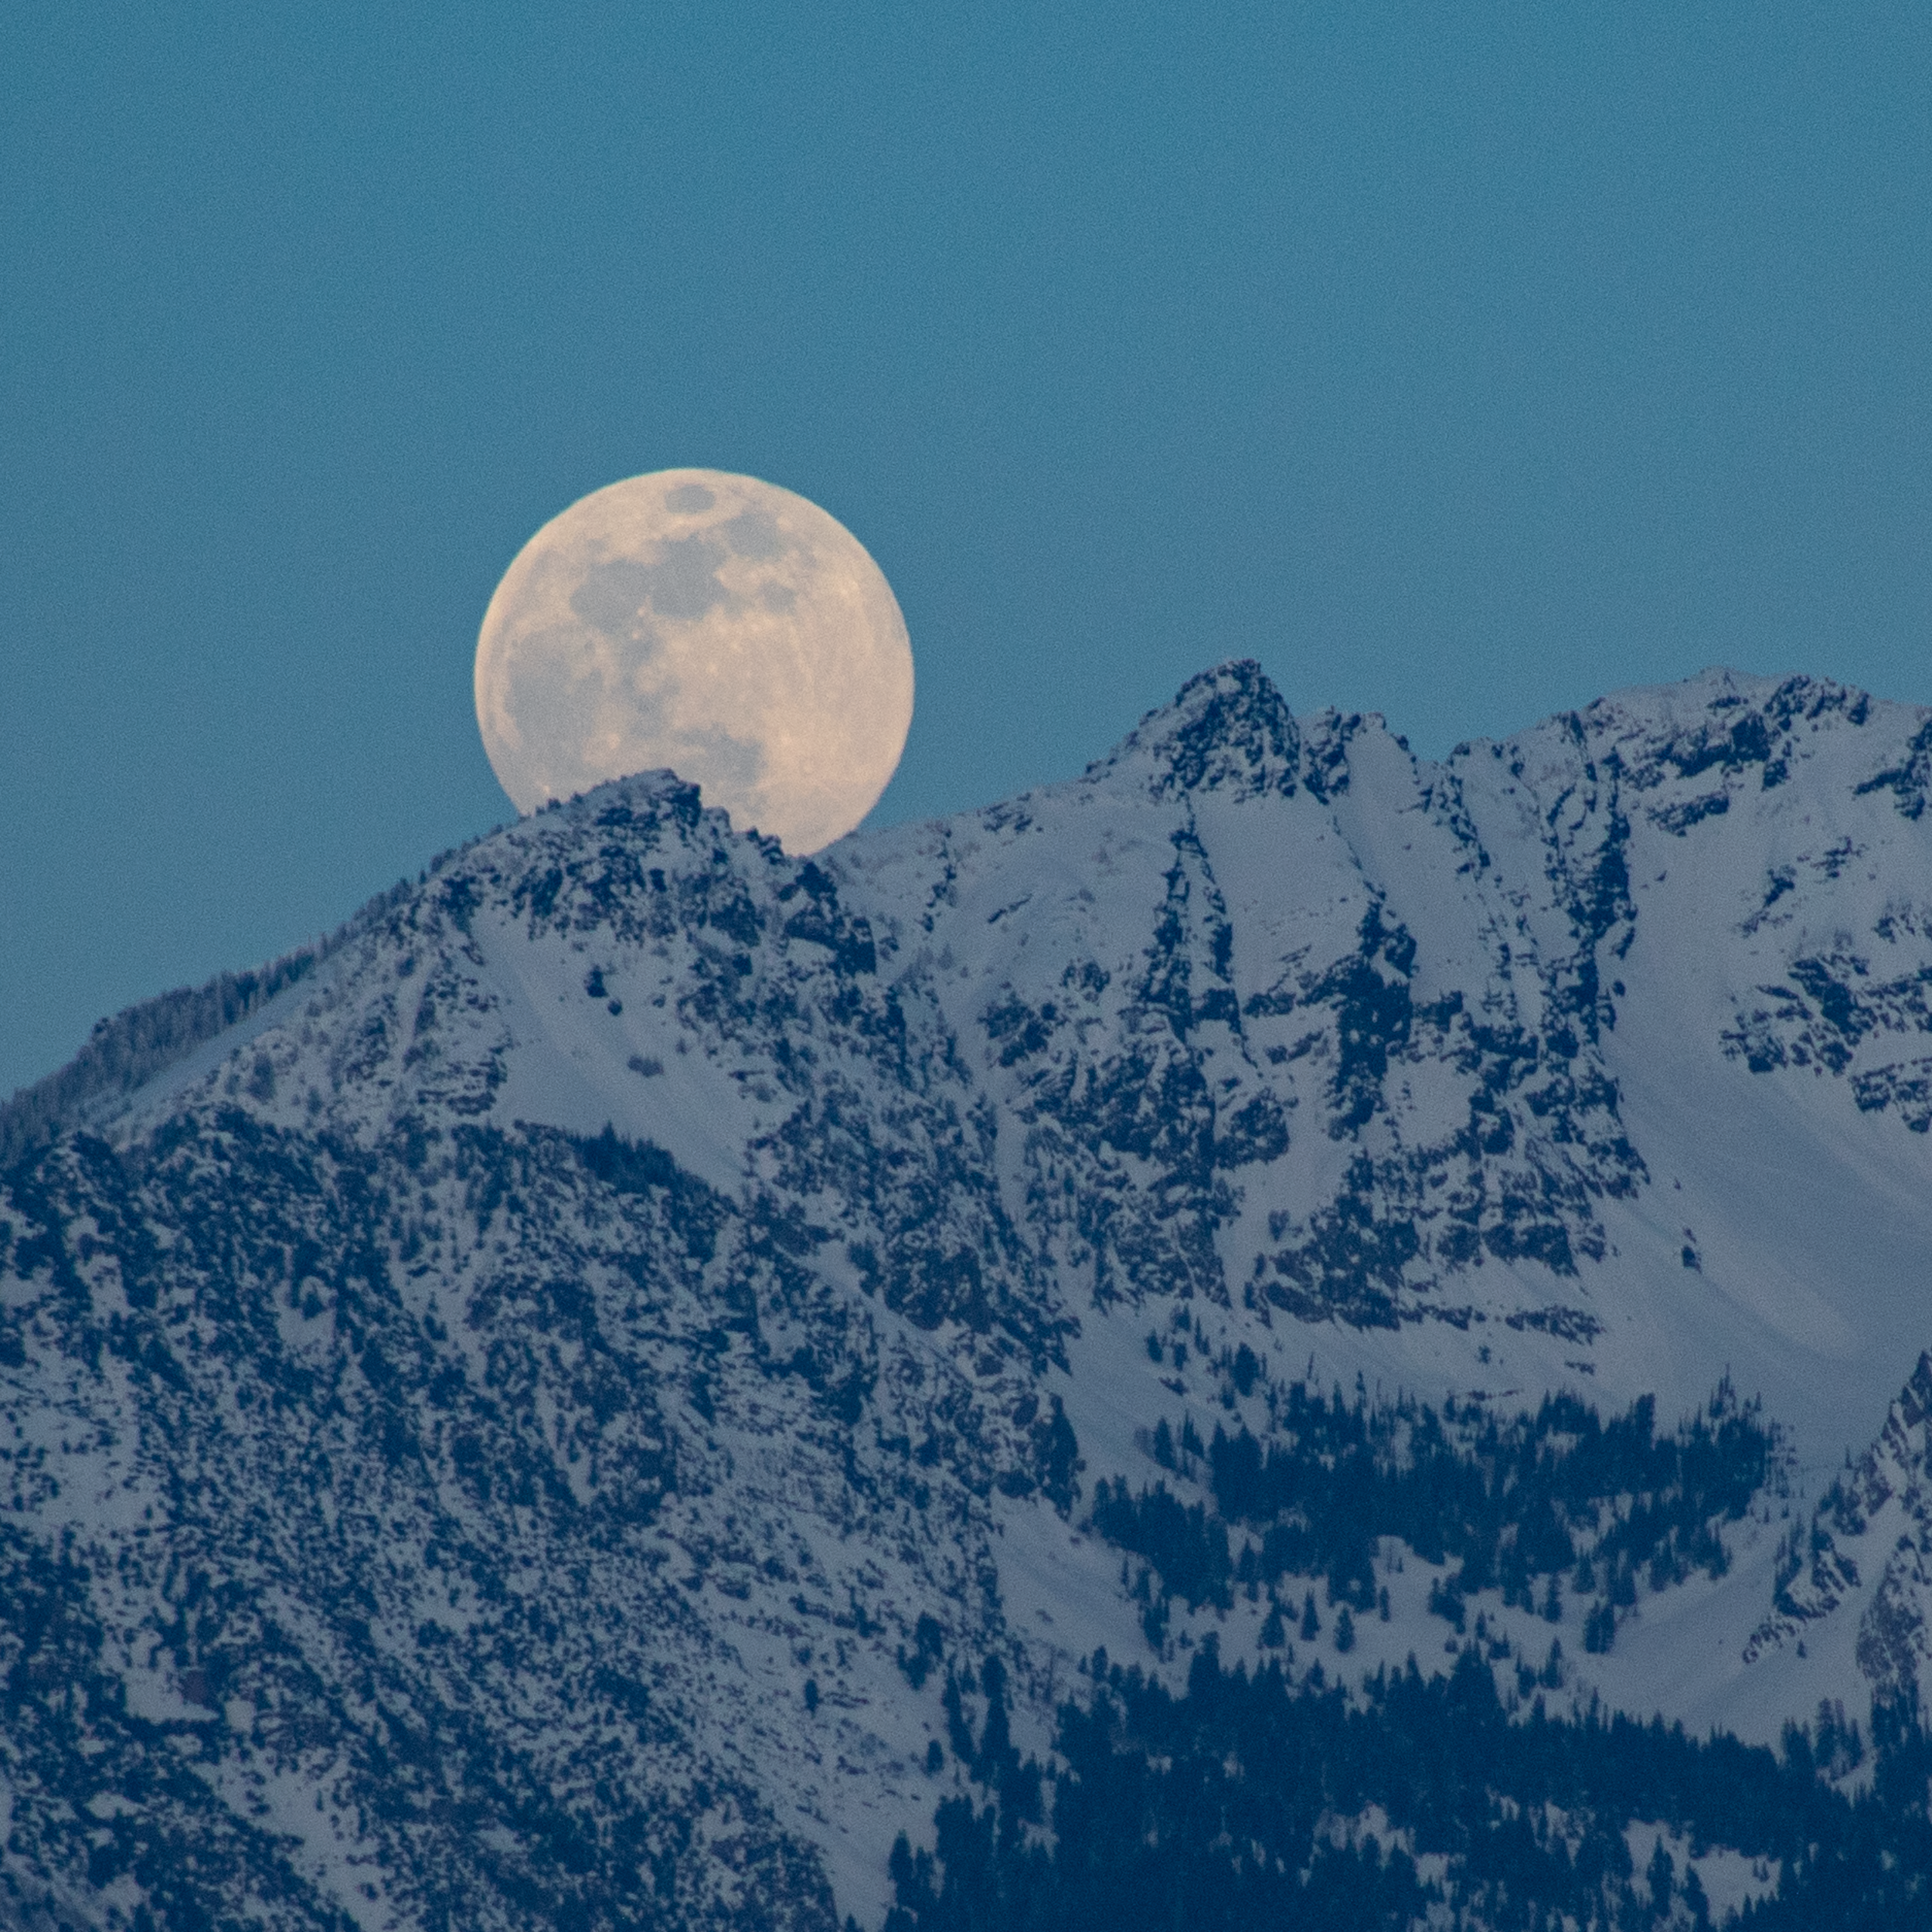 March-April 2024: The Next Full Moon is the Crow, Crust, Sap, Sugar, or Worm Moon